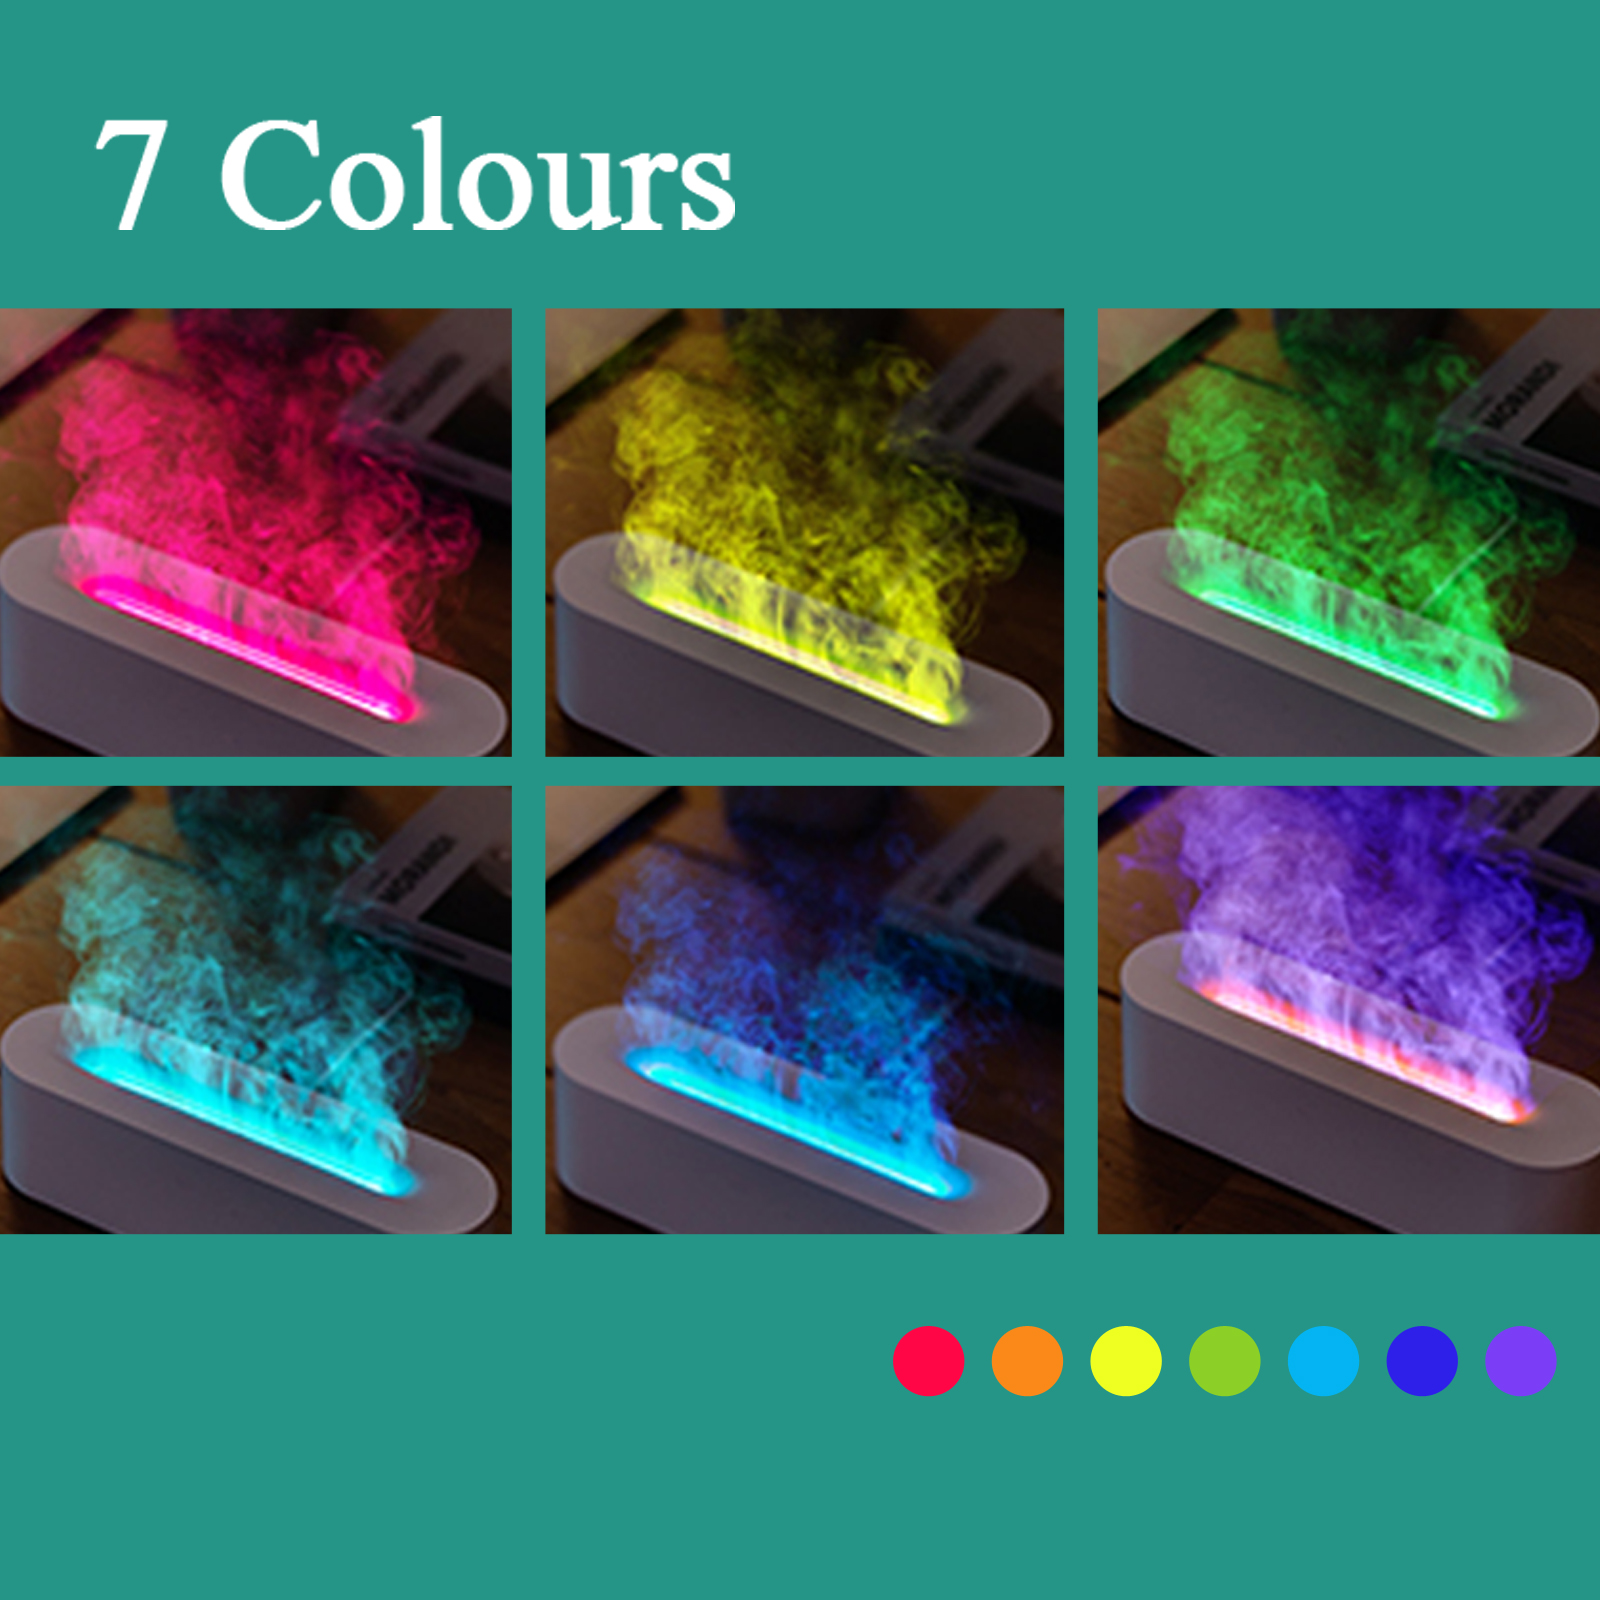 Aromatherapy Diffuser 7 Colours LED Light Ultrasonic Oil Humidifier Air Purifier